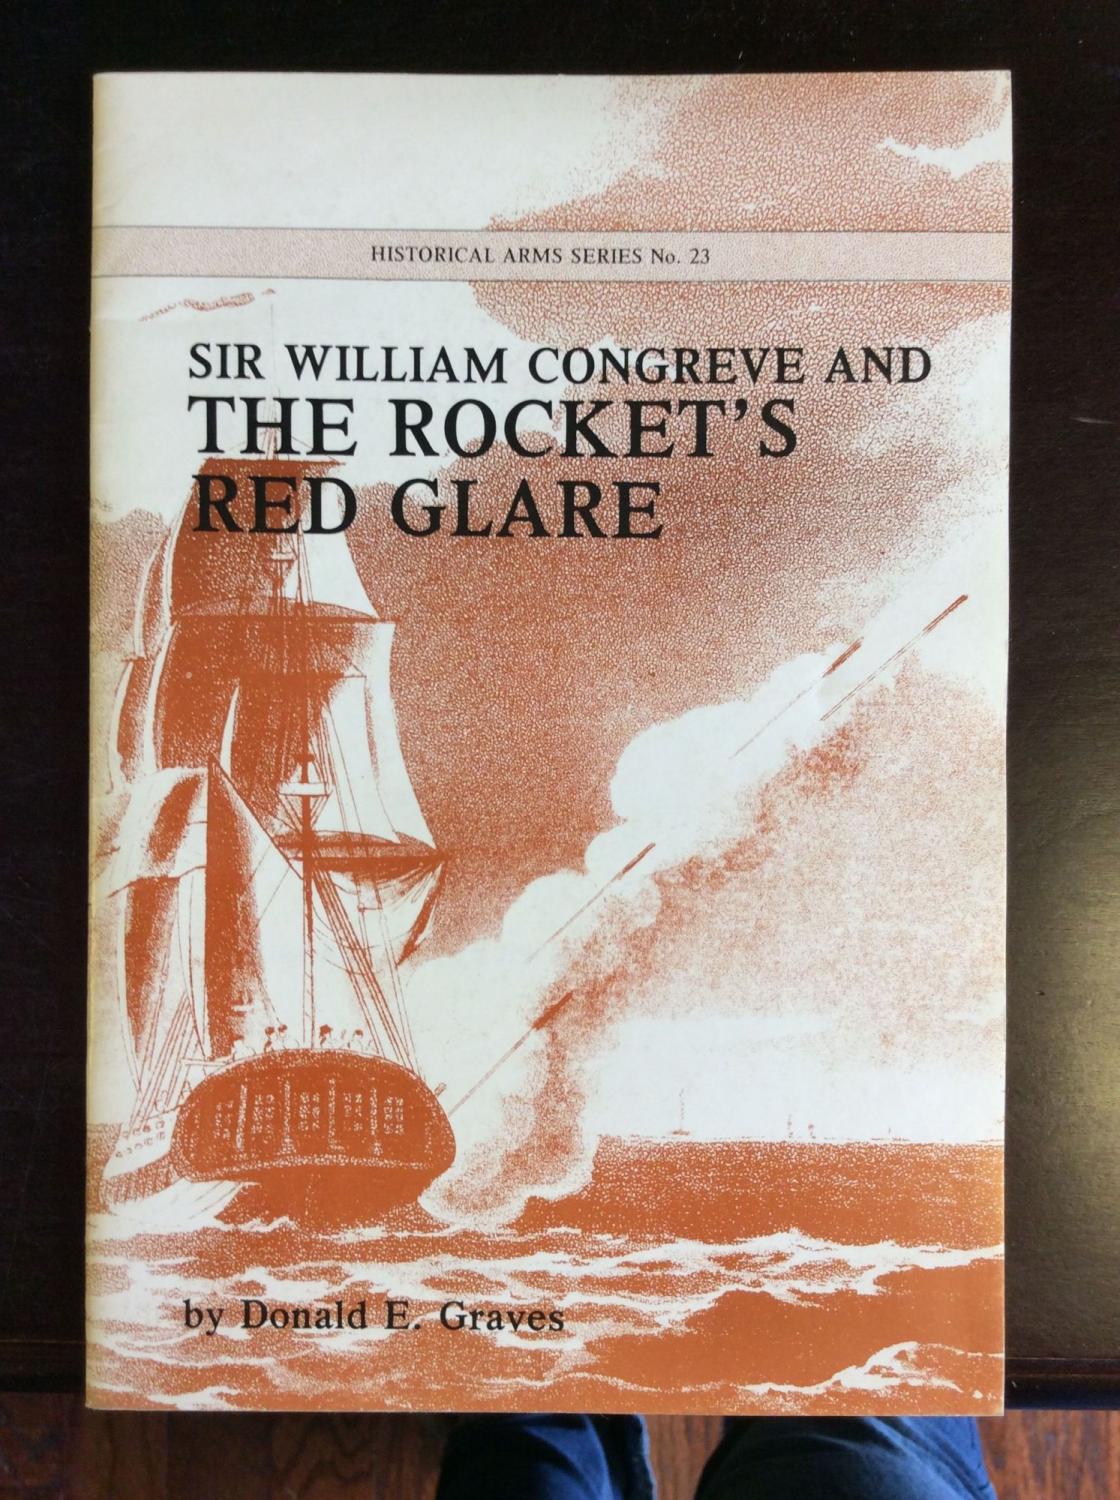 SIR WILLIAM CONGREVE AND THE ROCKET'S RED GLARE - Donald E. Graves